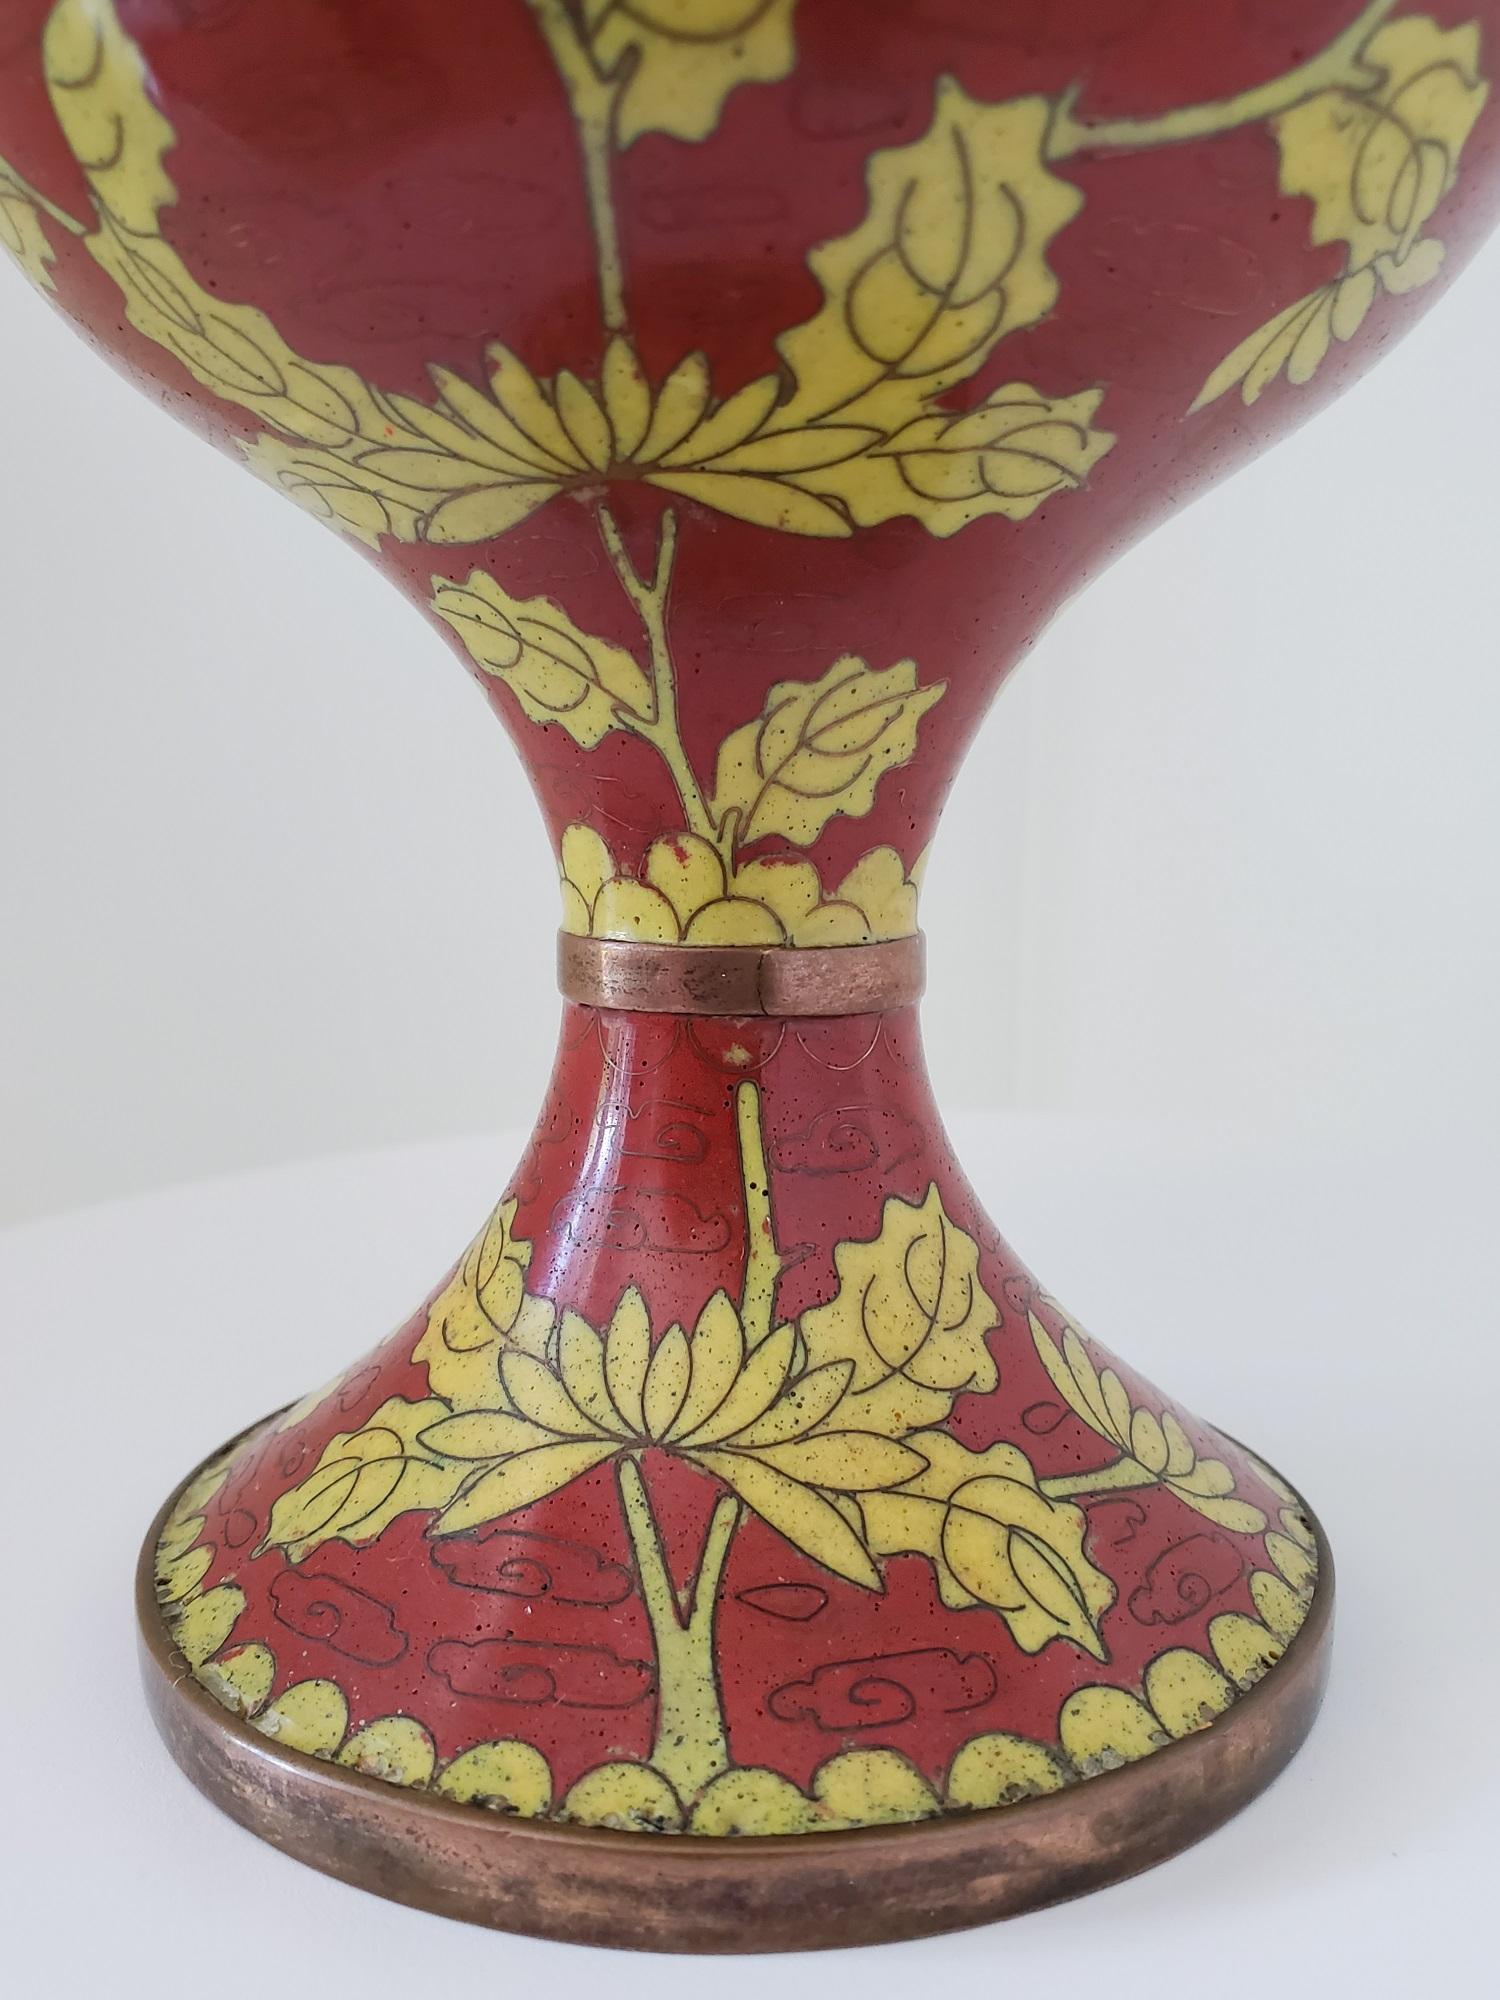 19th Century Chinese Cloisonné Urn or Lidded Vase Red with Yellow Floral Motif 7